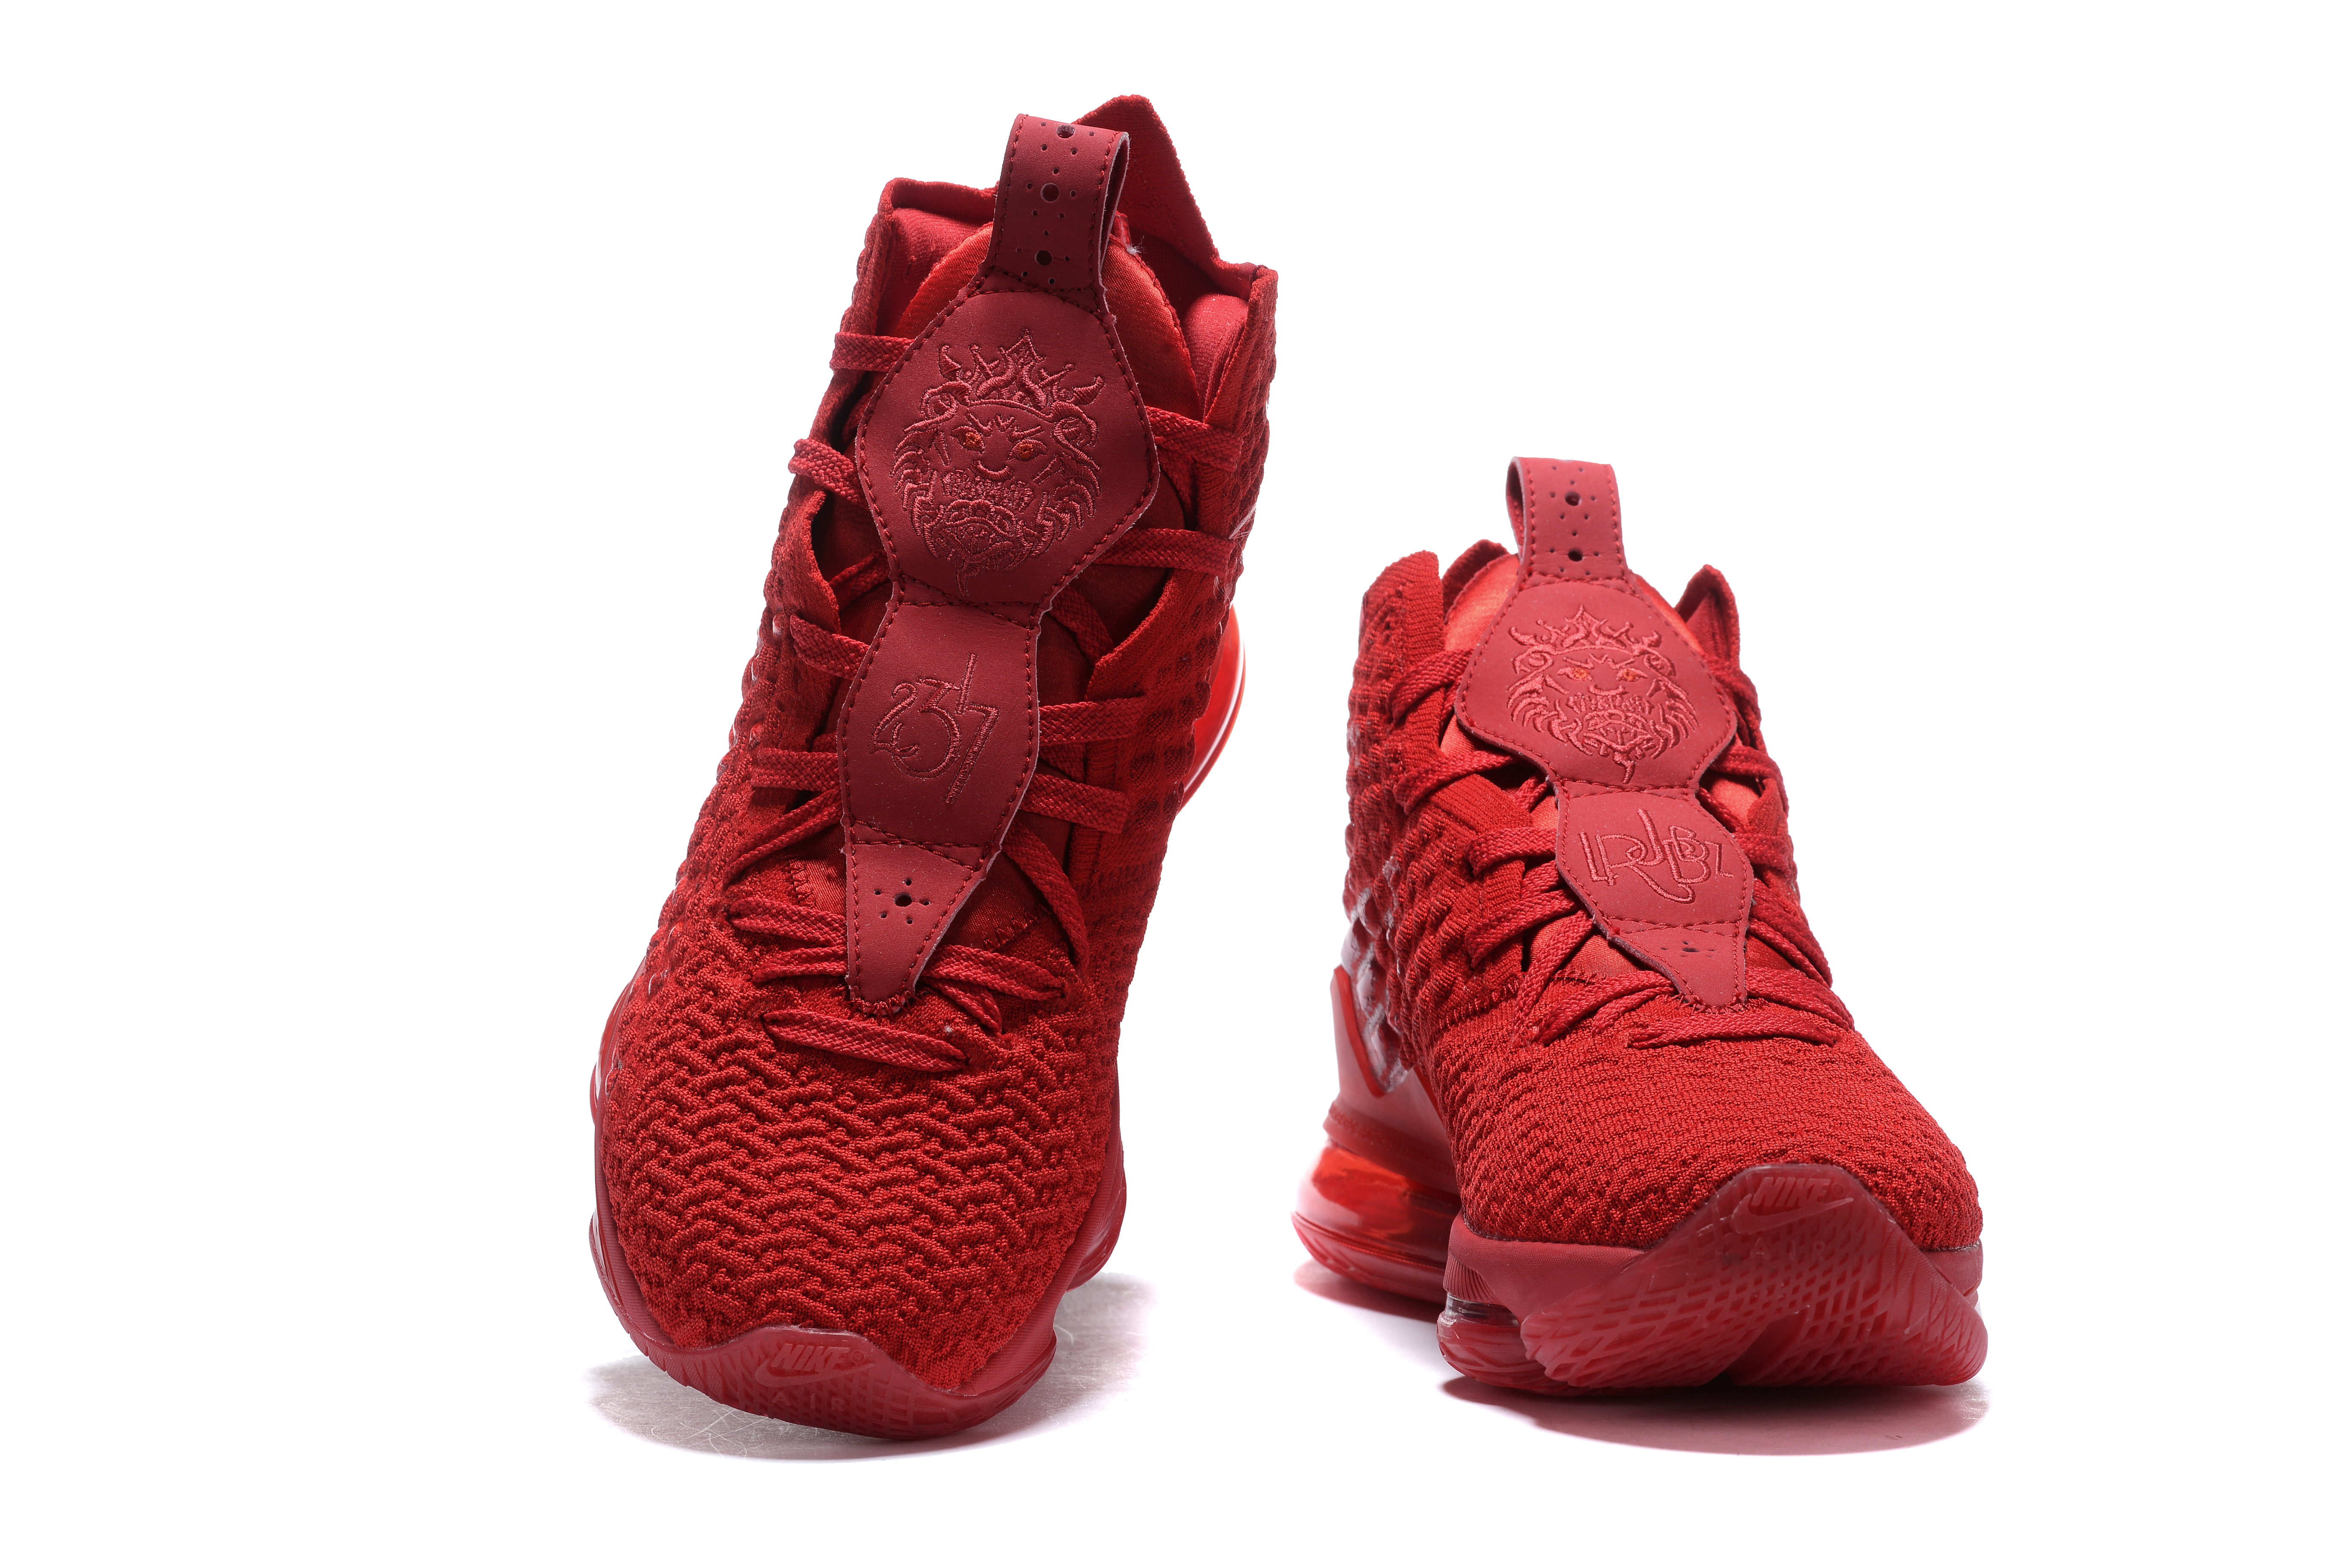 2020 Men Nike Lebron James XVII All Red Shoes